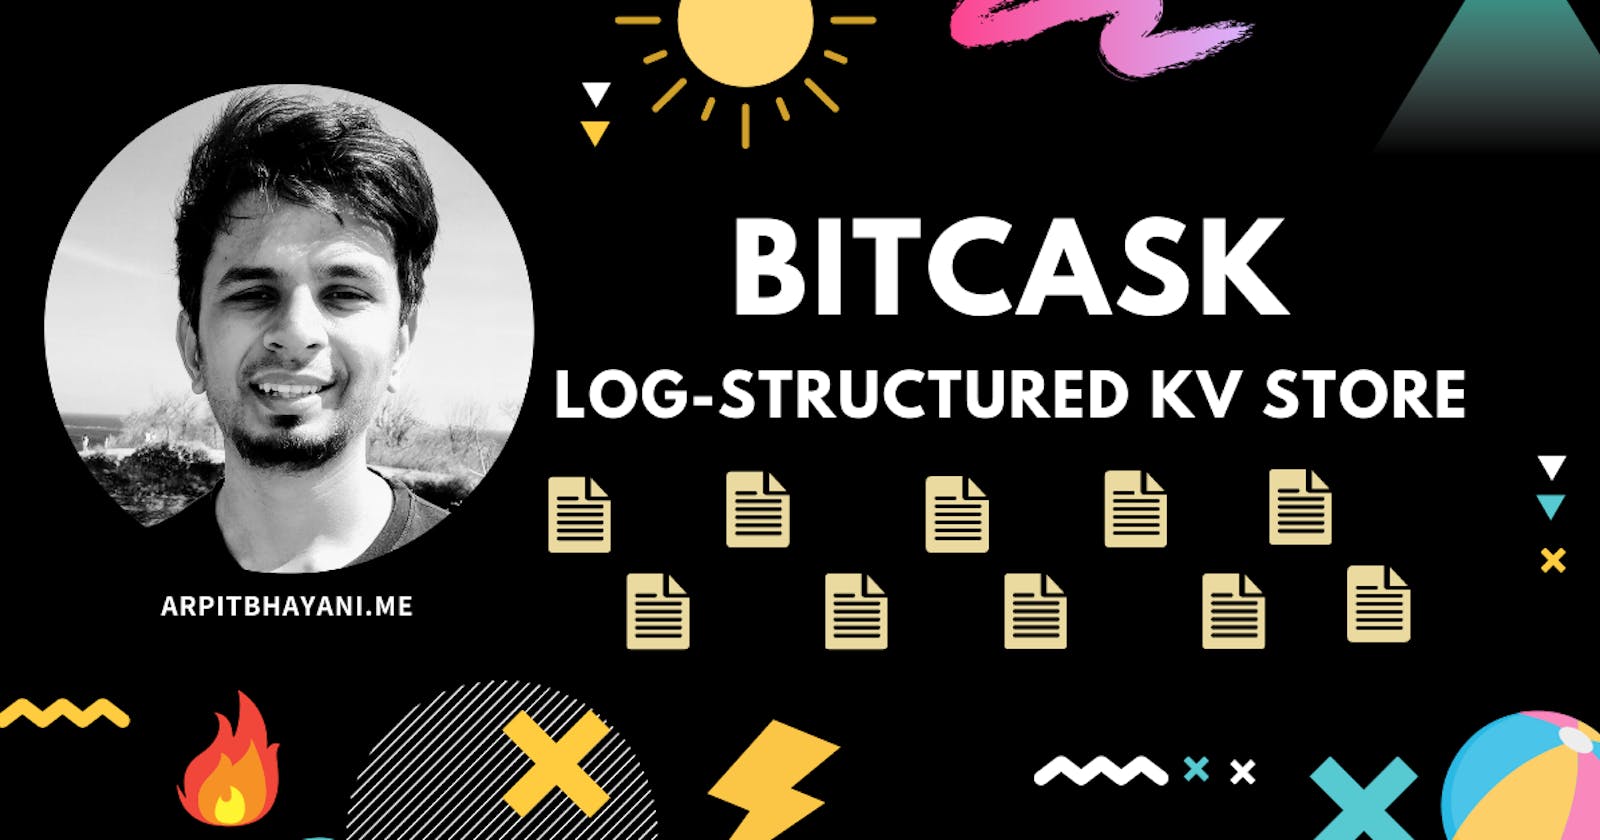 Bitcask - a log-structured fast KV store